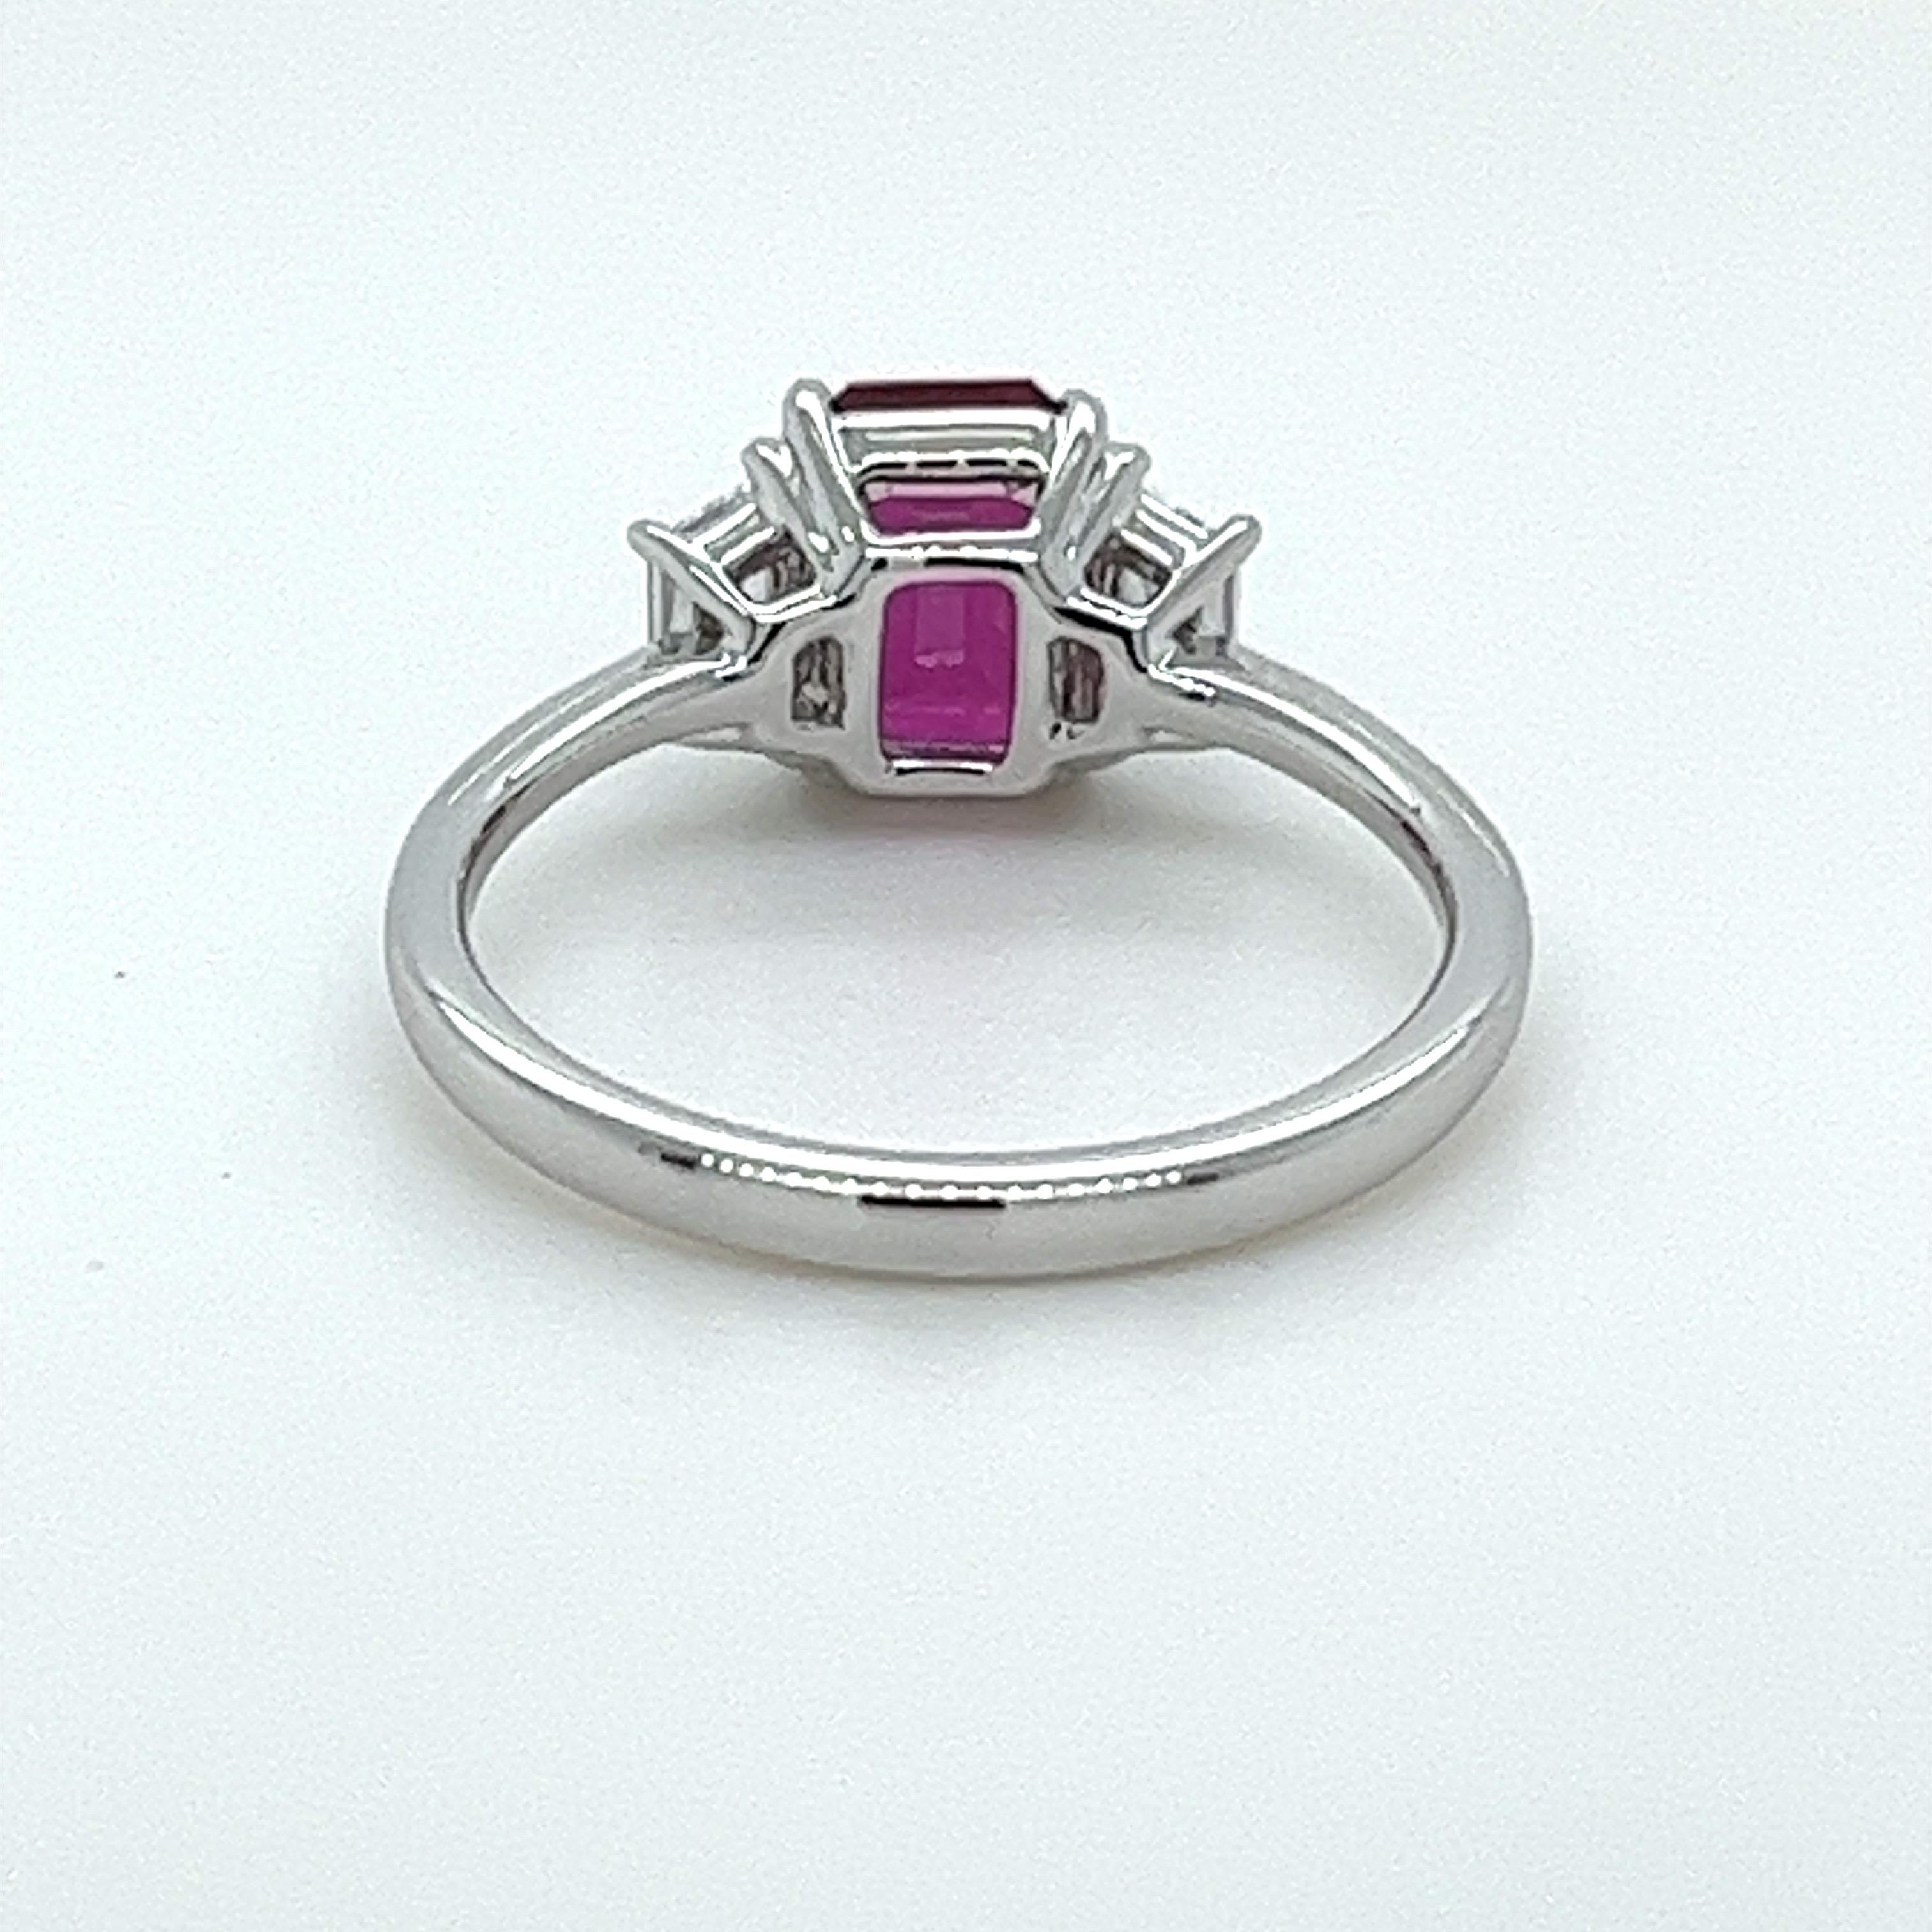 NO HEAT 1.43 Carat Emerald Cut Ruby & Diamond Ring in 18 Karat White Gold In New Condition For Sale In Great Neck, NY